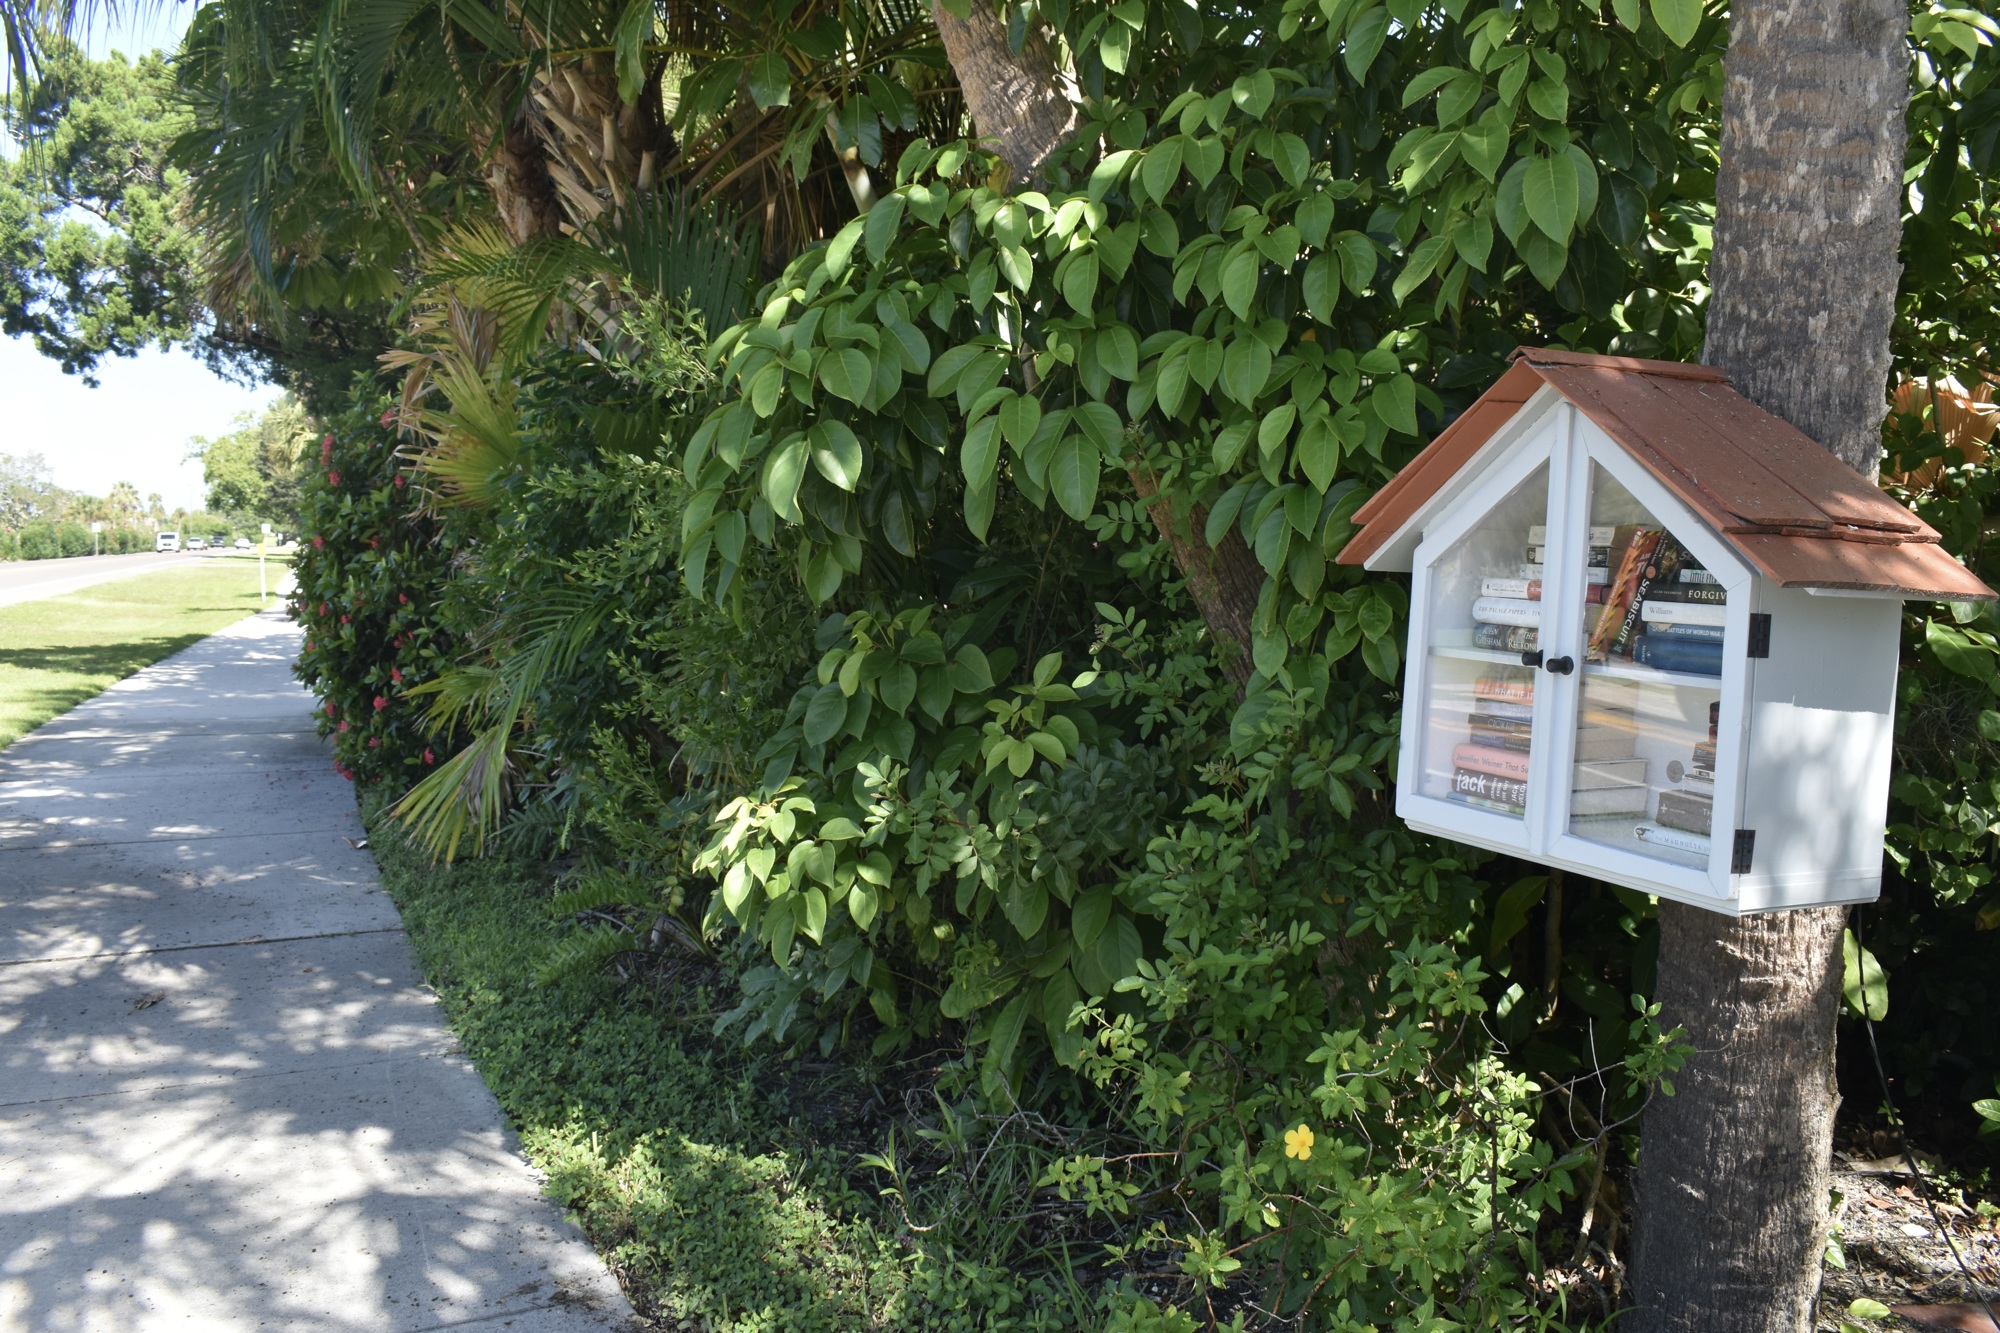 The Little Free Library on Gulf of Mexico Drive near Sloop Lane. (Photo by Lesley Dwyer)